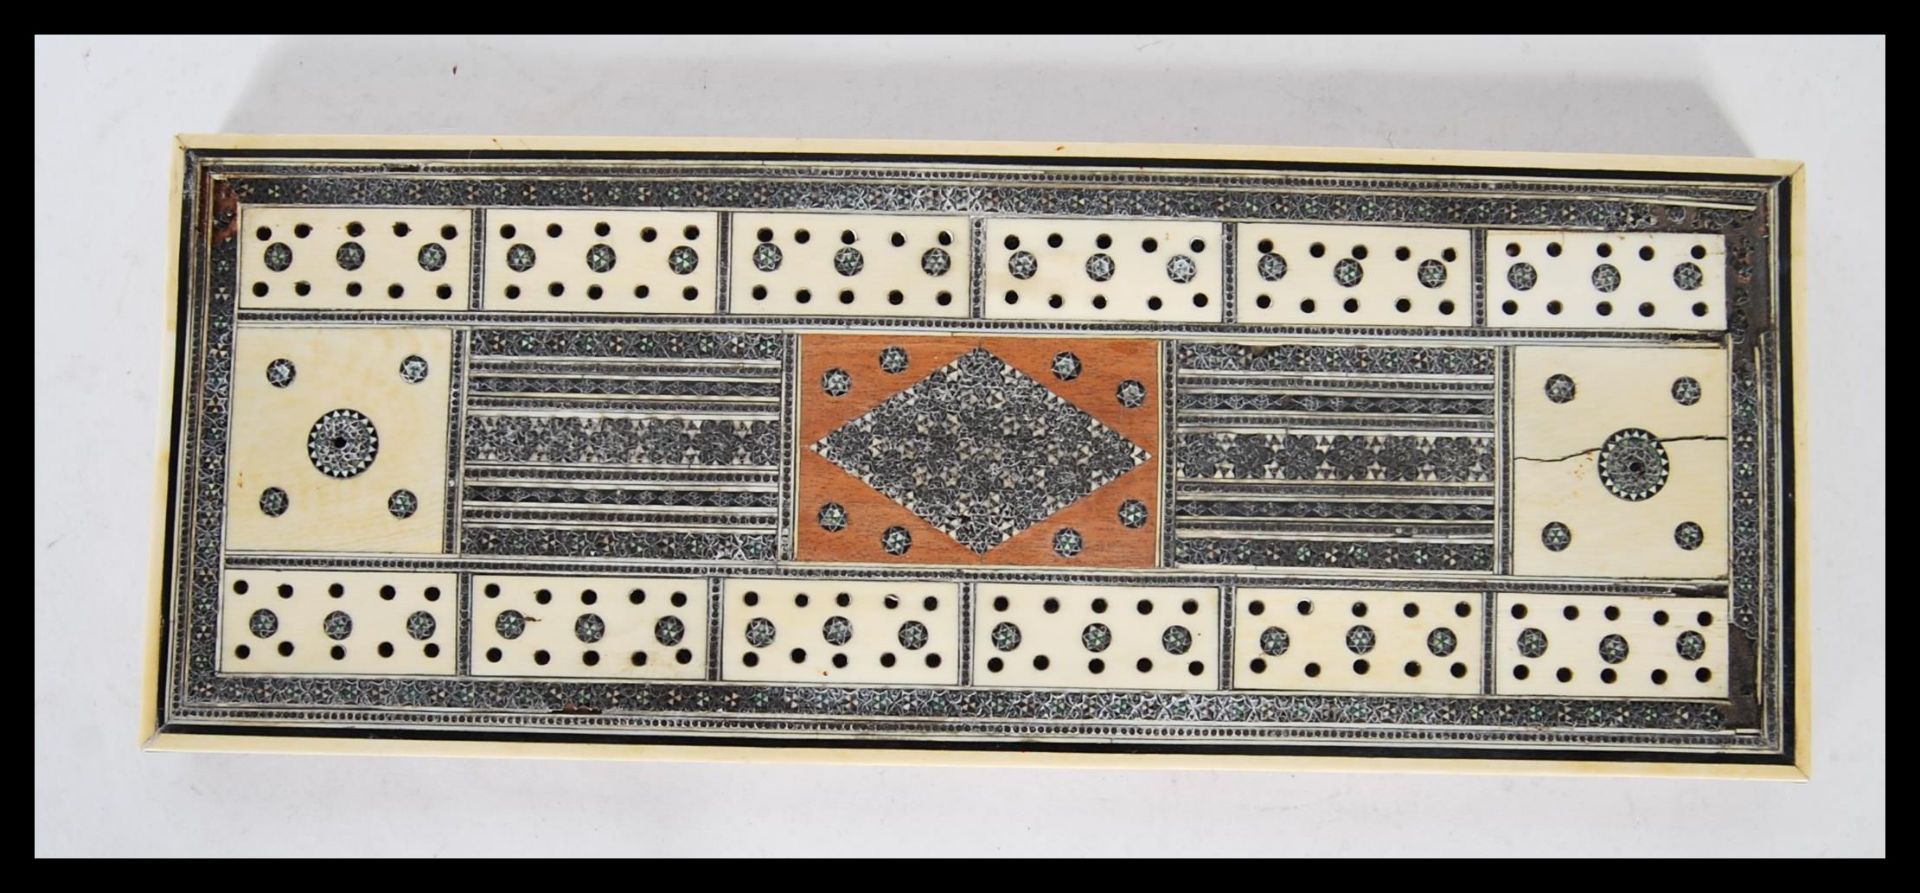 A late 19th Century Anglo Indian Colonial Vizagapatam cribbage board, having ivory, bone and micro